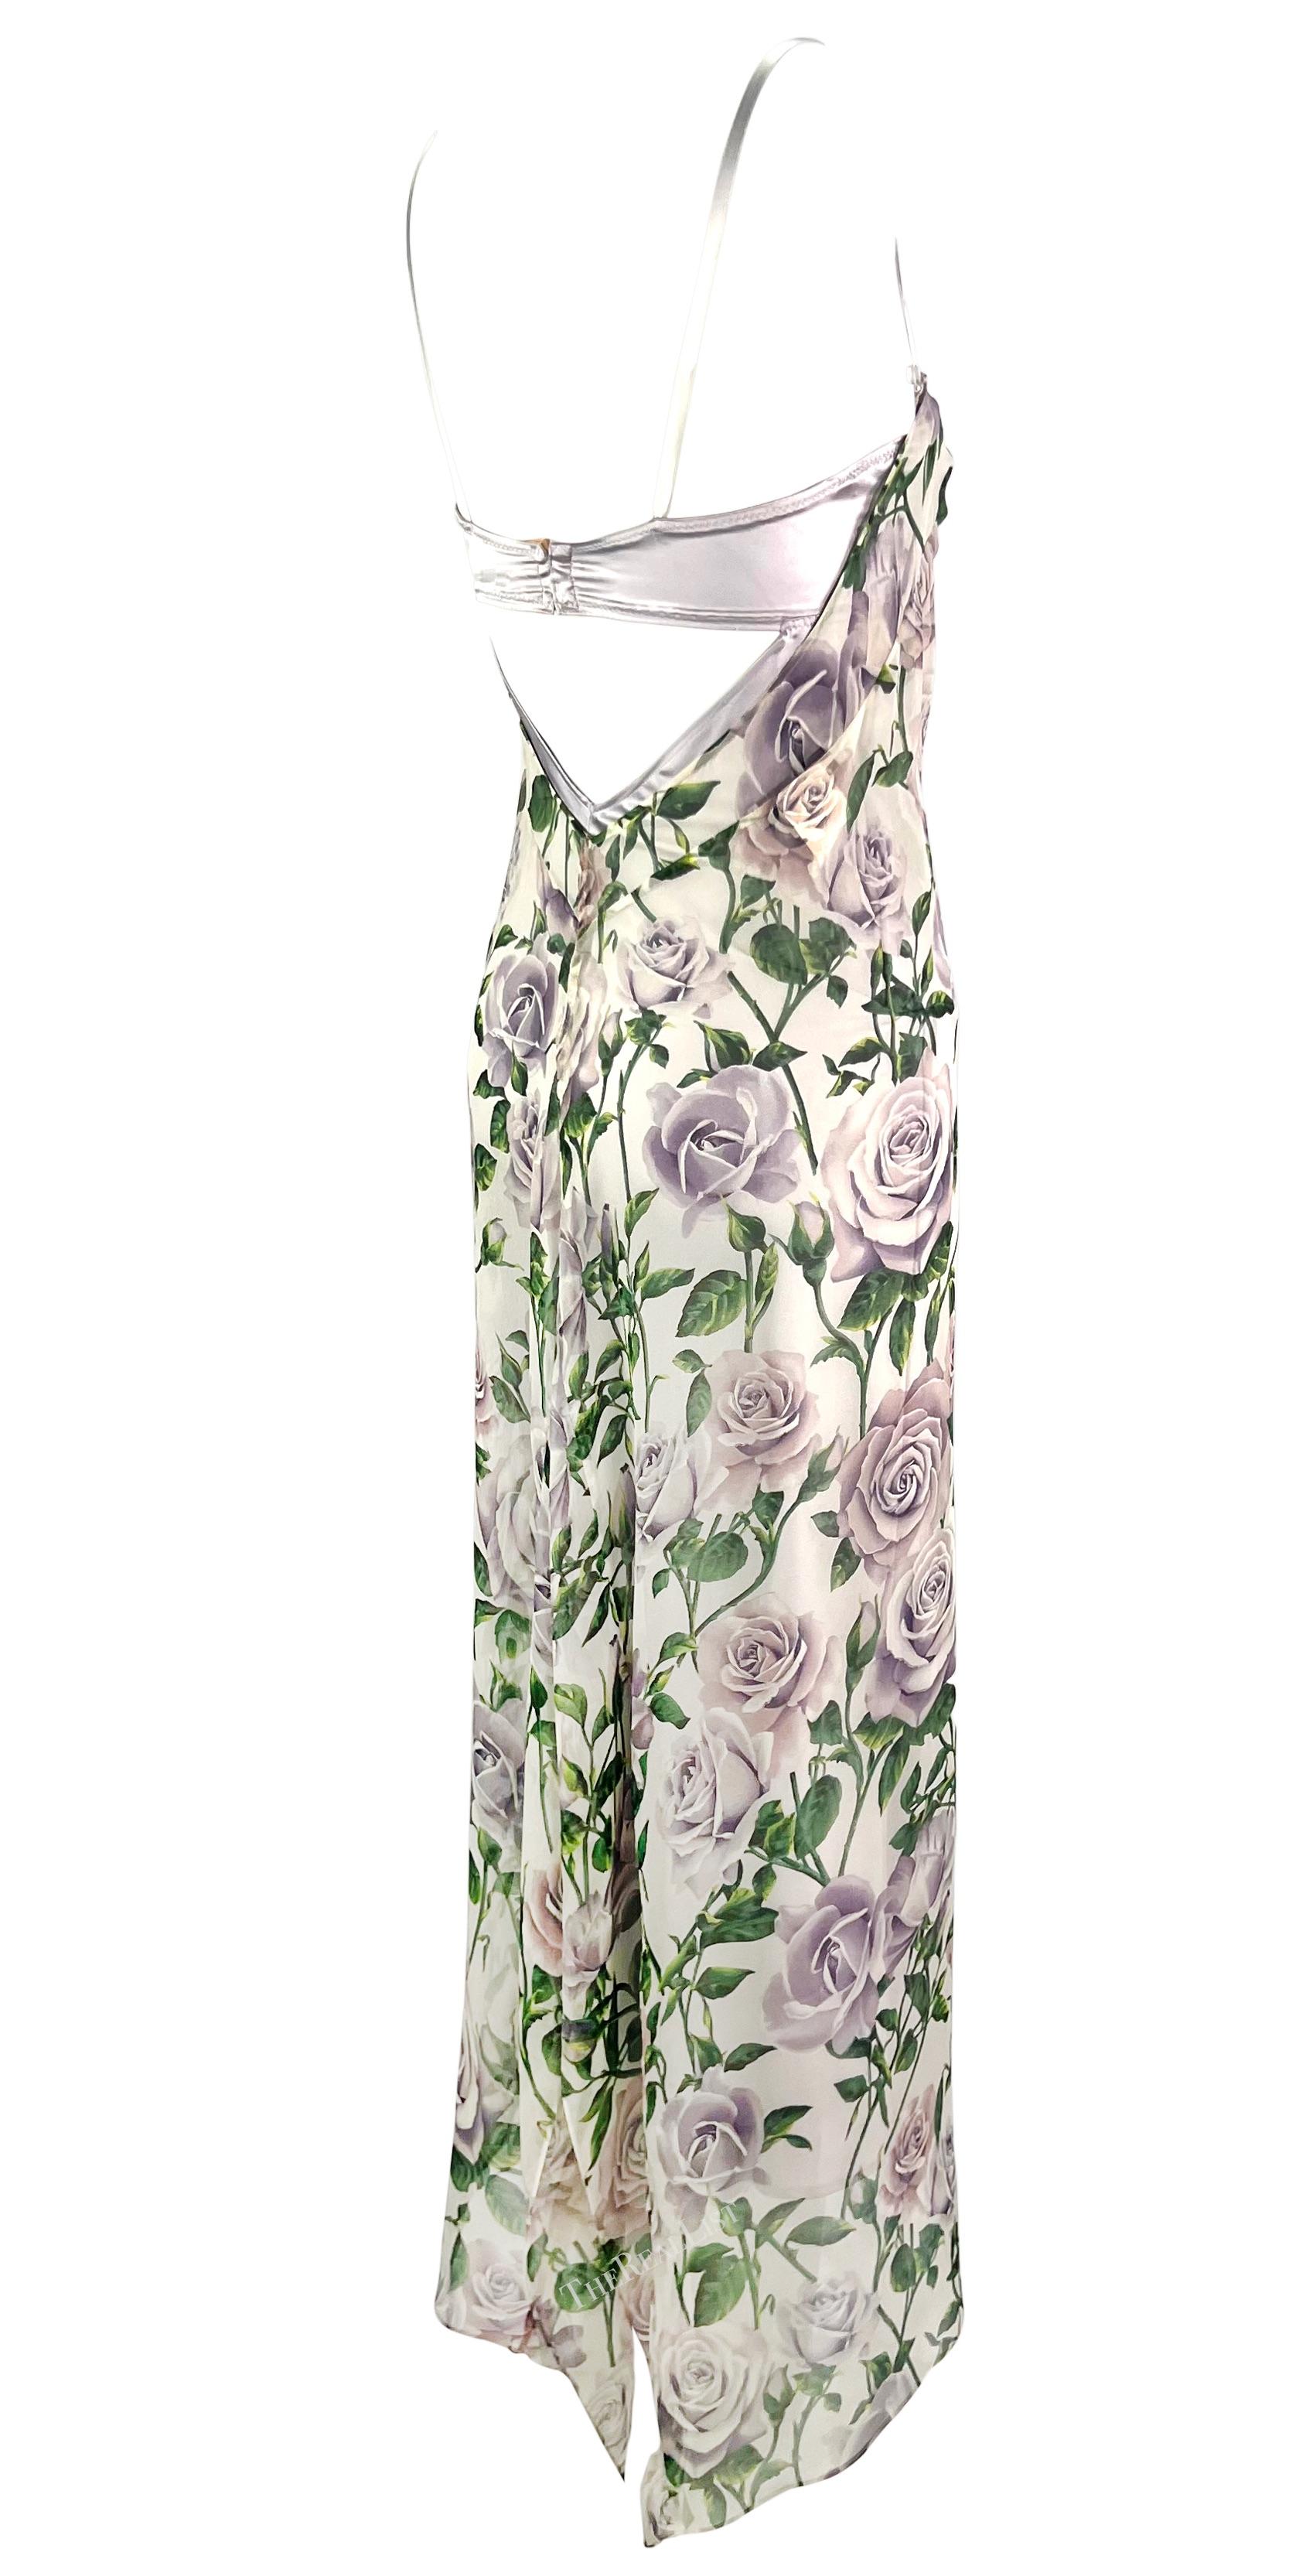 Early 2000s Dolce & Gabbana Sheer Chiffon White Purple Rose Print Overlay Gown In Good Condition For Sale In West Hollywood, CA